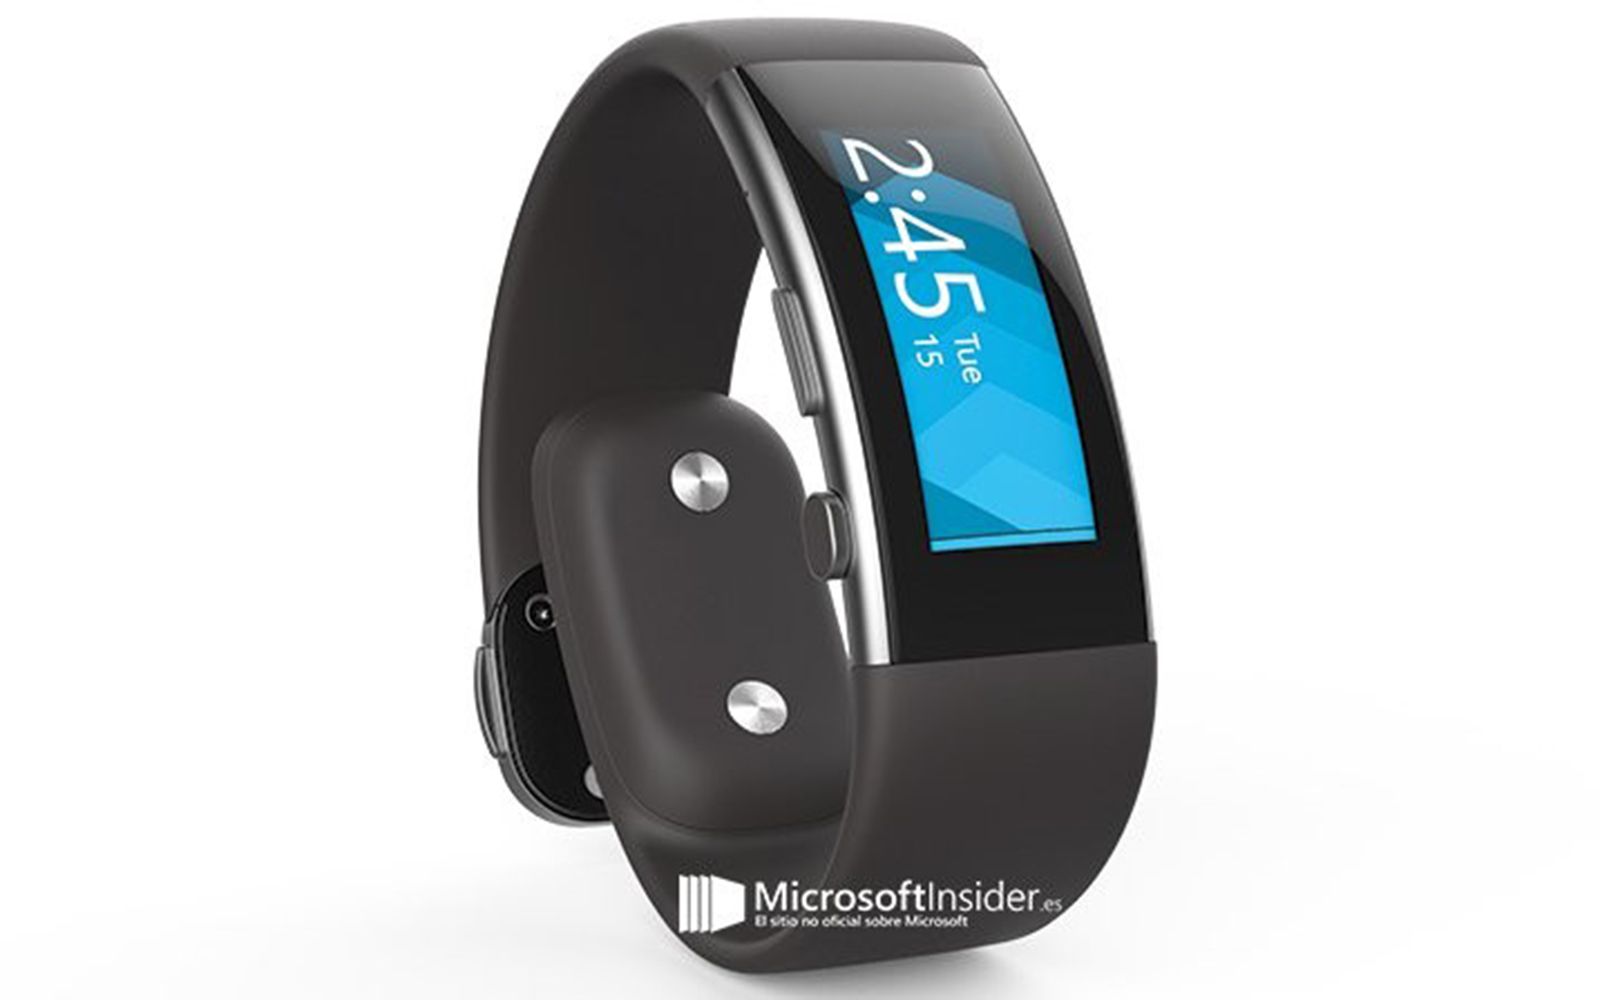 microsoft band 2 may fix comfort issues with curved screen flexible strap and more image 1